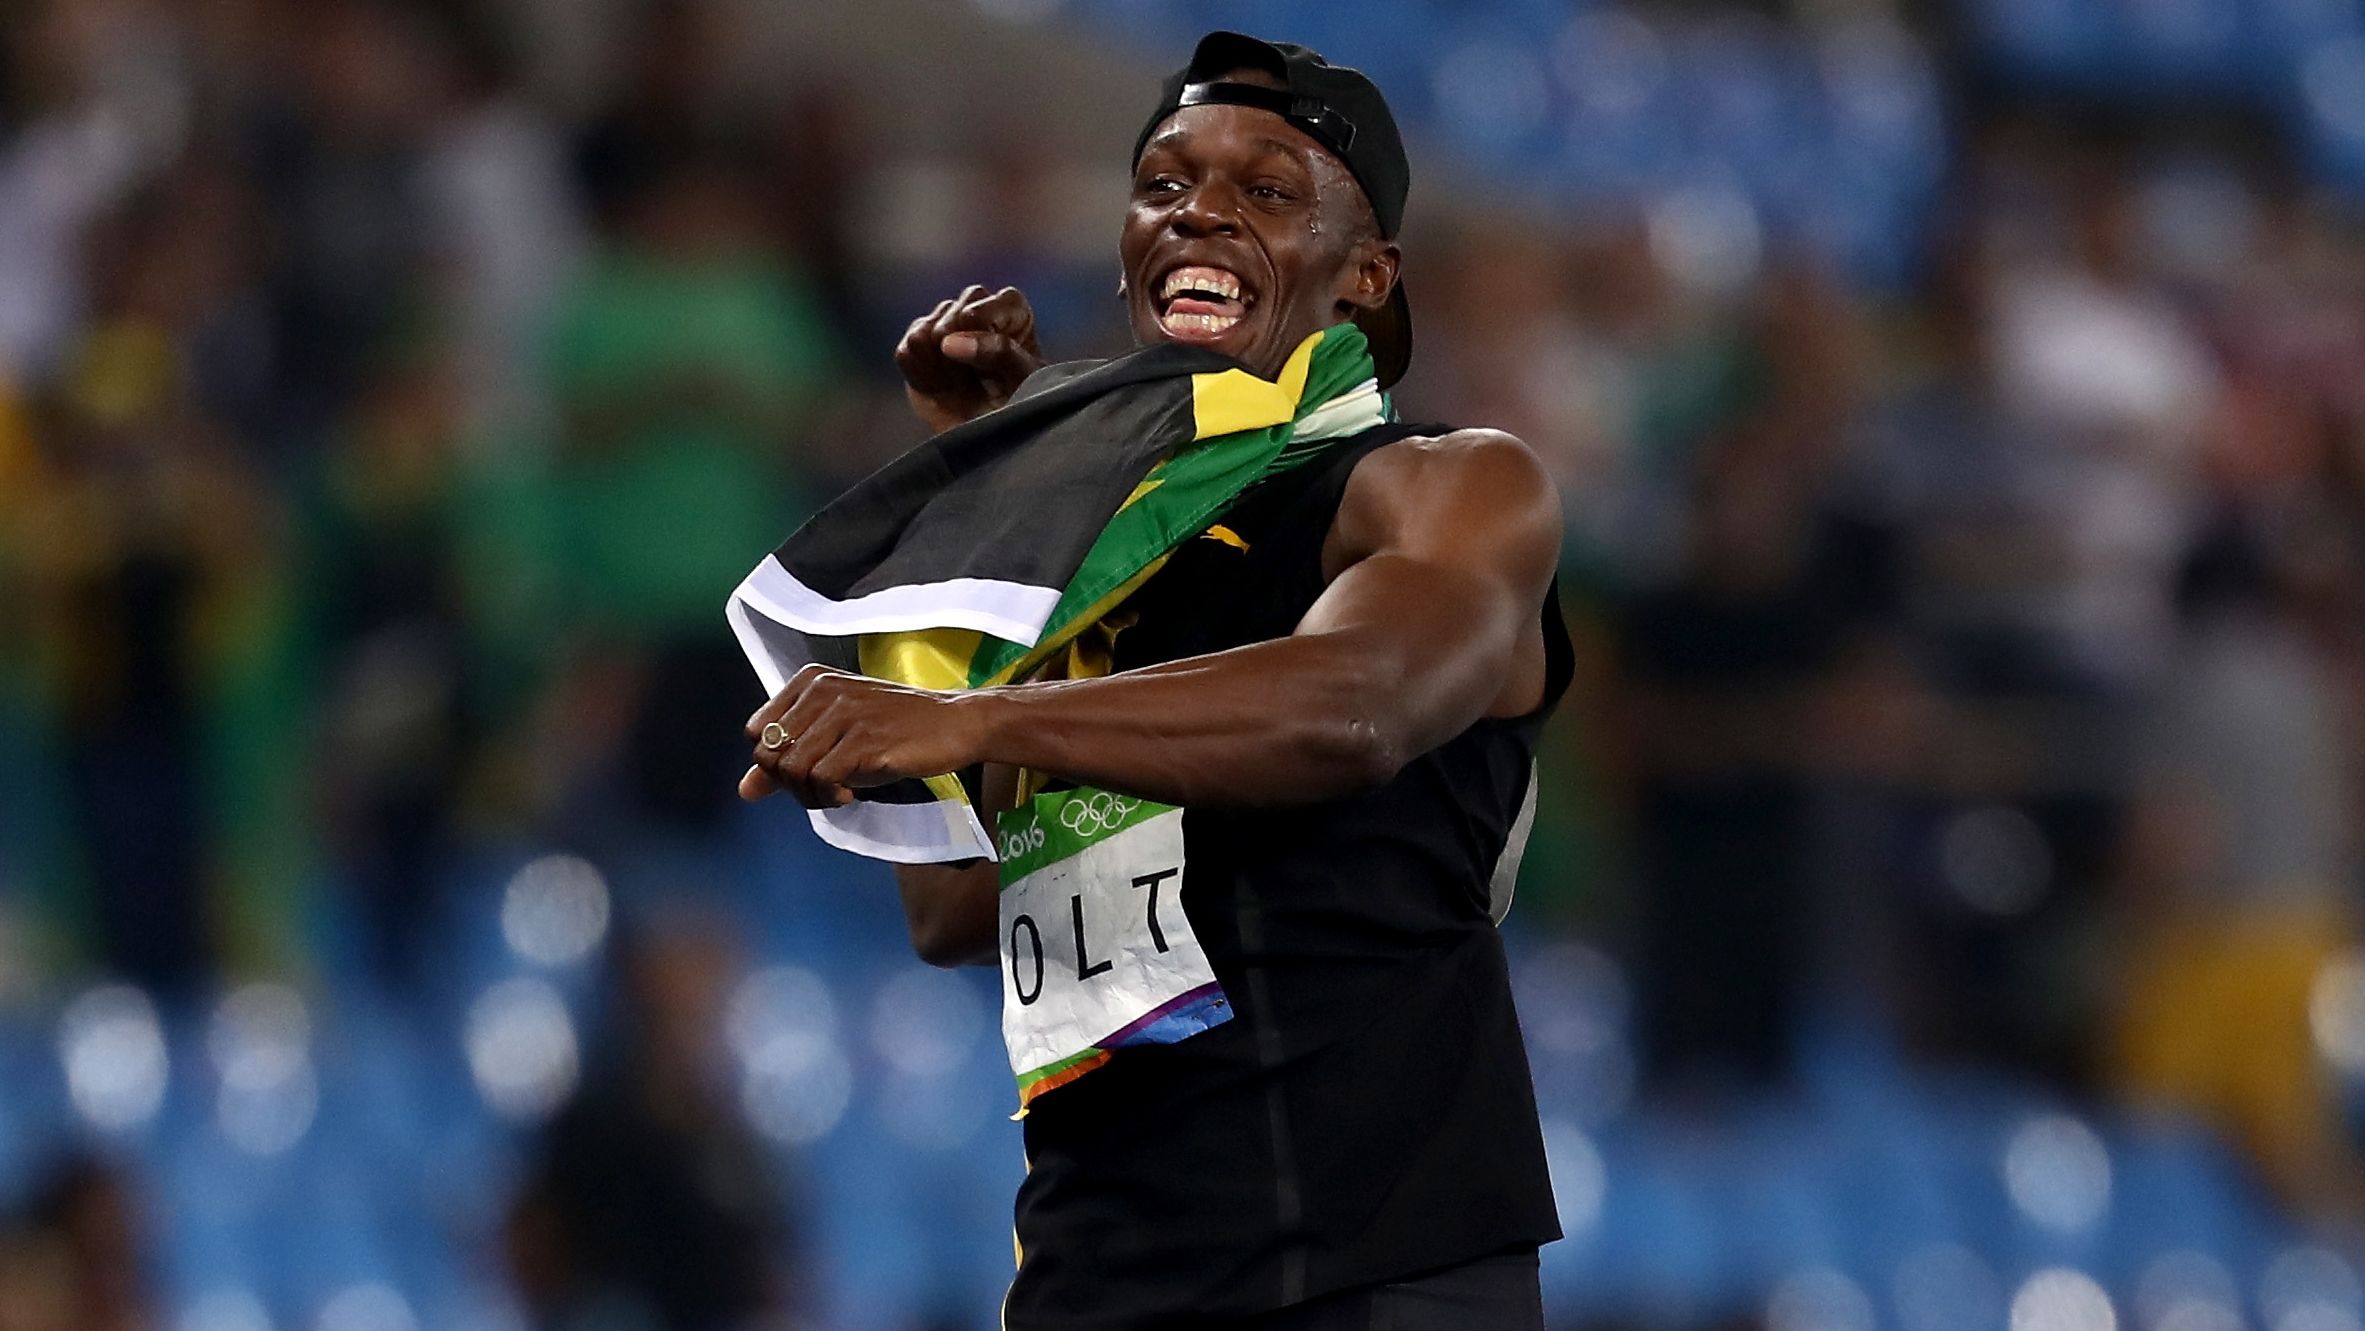 Bolt of Jamaica celebrates winning the Men's 4 x 100m relay at the Rio Olympics 